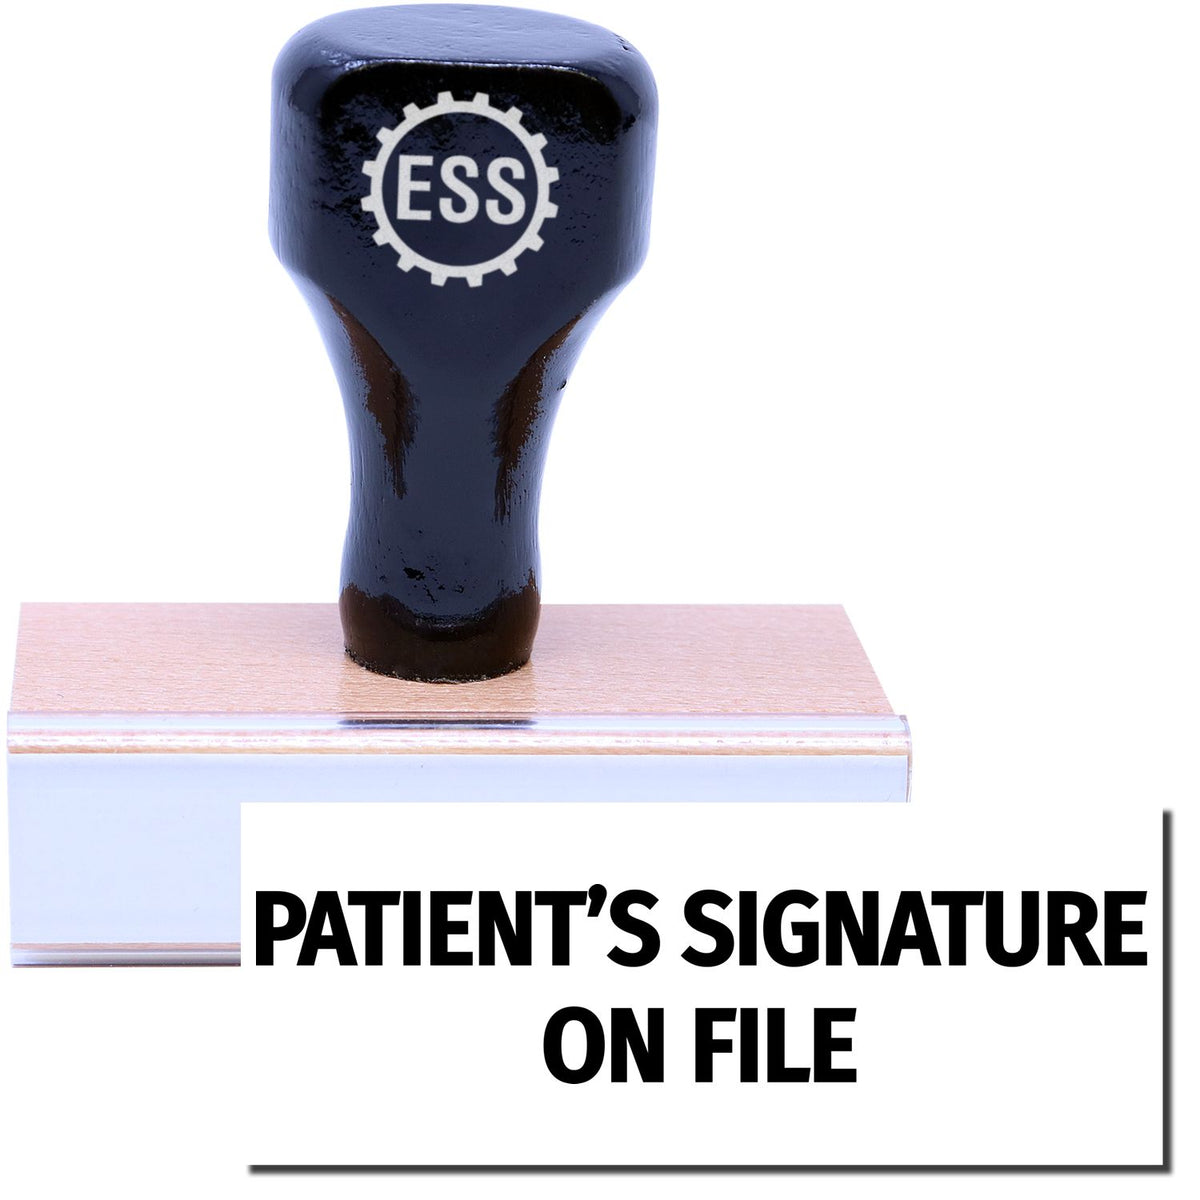 A stock office rubber stamp with a stamped image showing how the text &quot;PATIENT&#39;S SIGNATURE ON FILE&quot; is displayed after stamping.